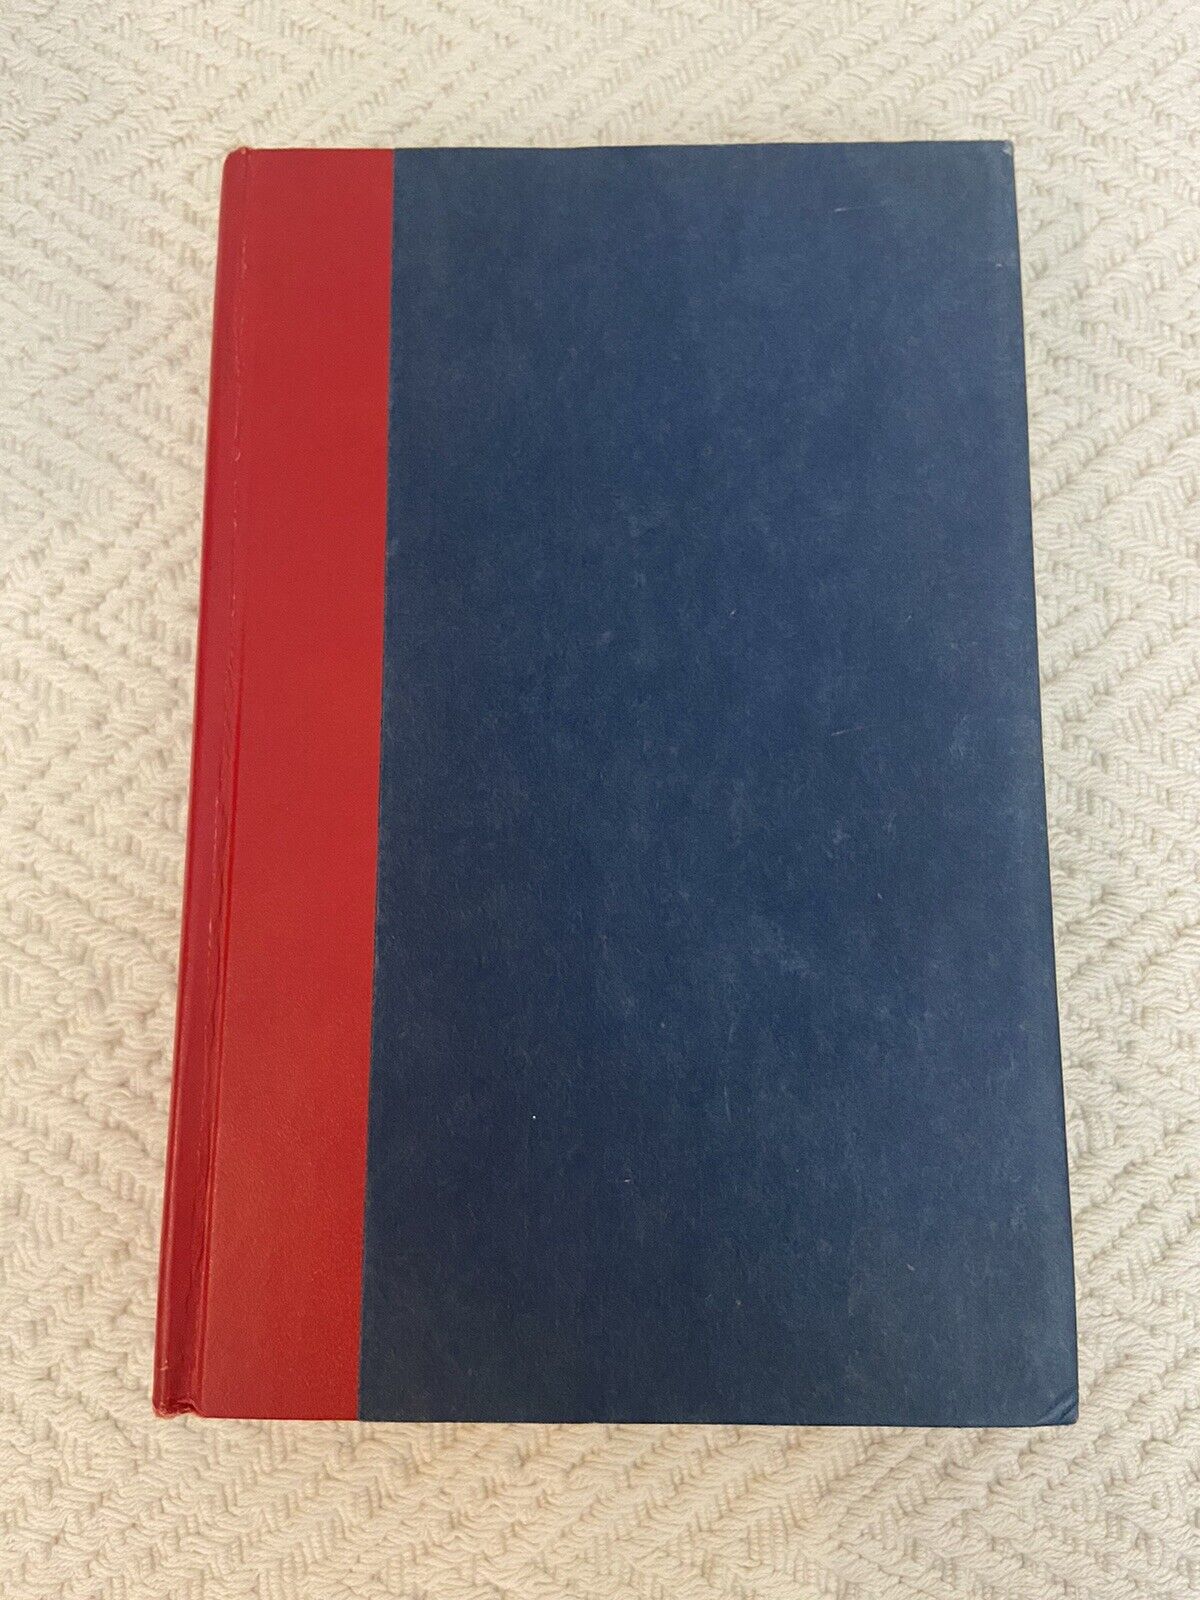 On to Berlin by James M. Gavin FIRST EDITION & 1st PRINT  (1978, Hardcover)